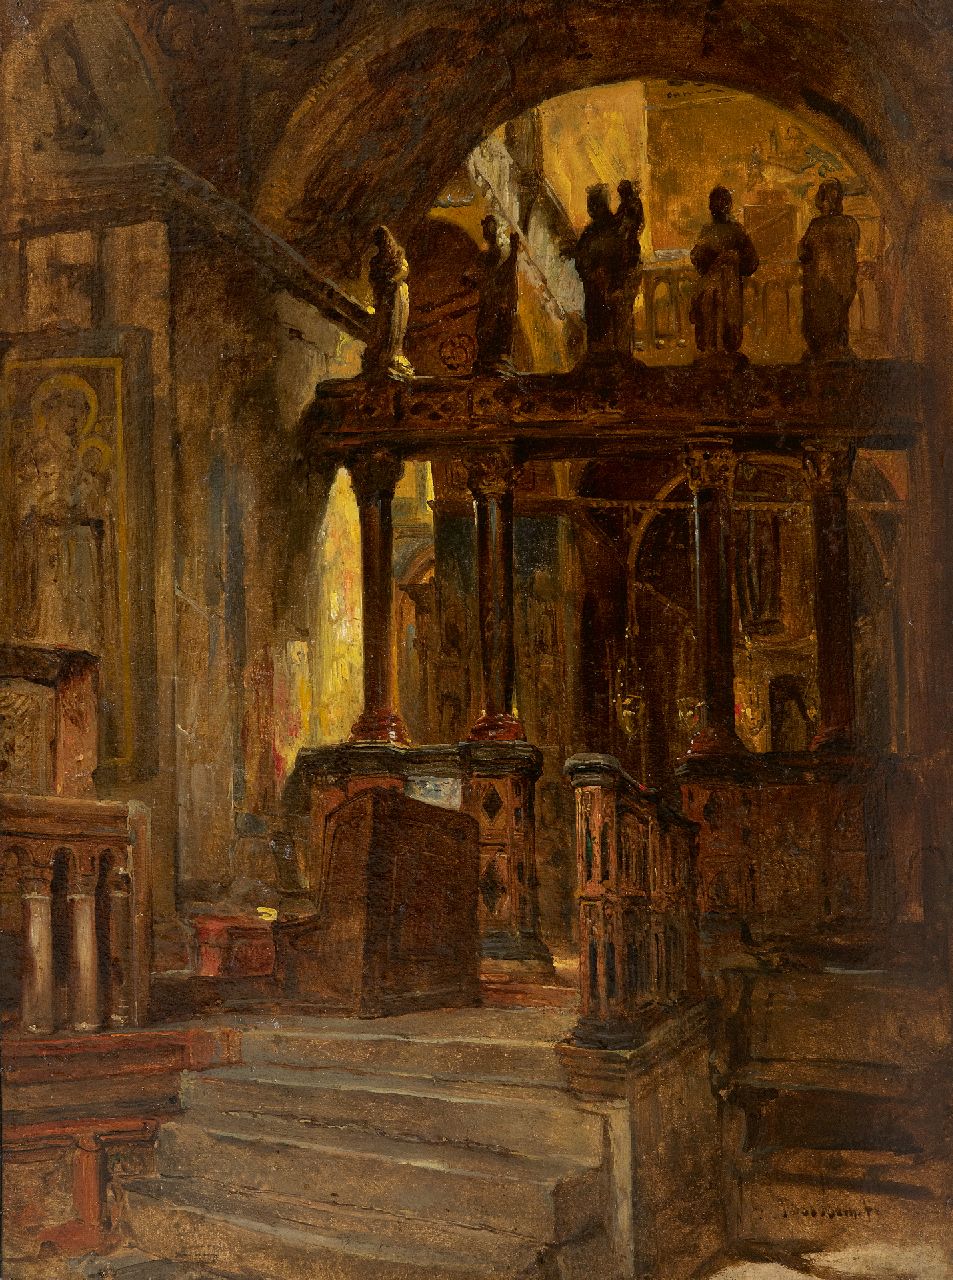 Bosboom J.  | Johannes Bosboom | Paintings offered for sale | Interior of an Eastern Orthodox Church, oil on panel 41.9 x 31.4 cm, signed l.r.